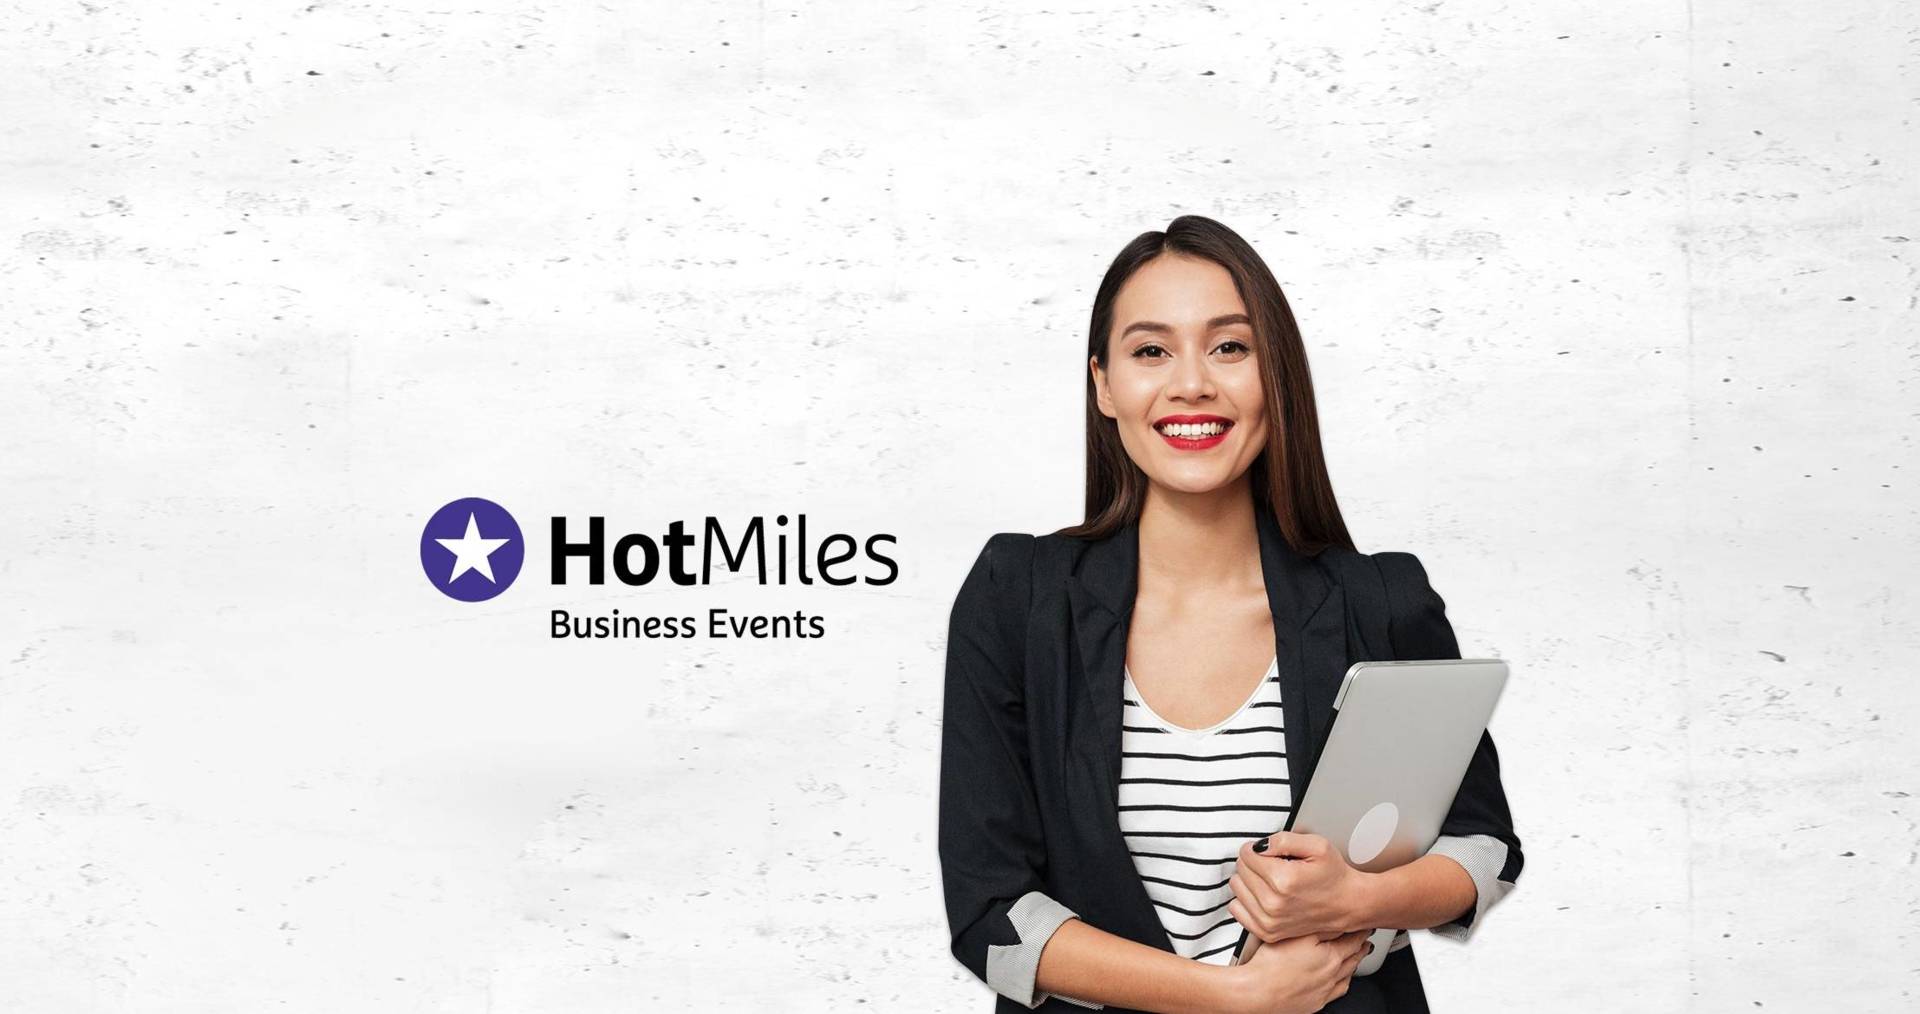 Frequently Asked Questions about HotMiles Business